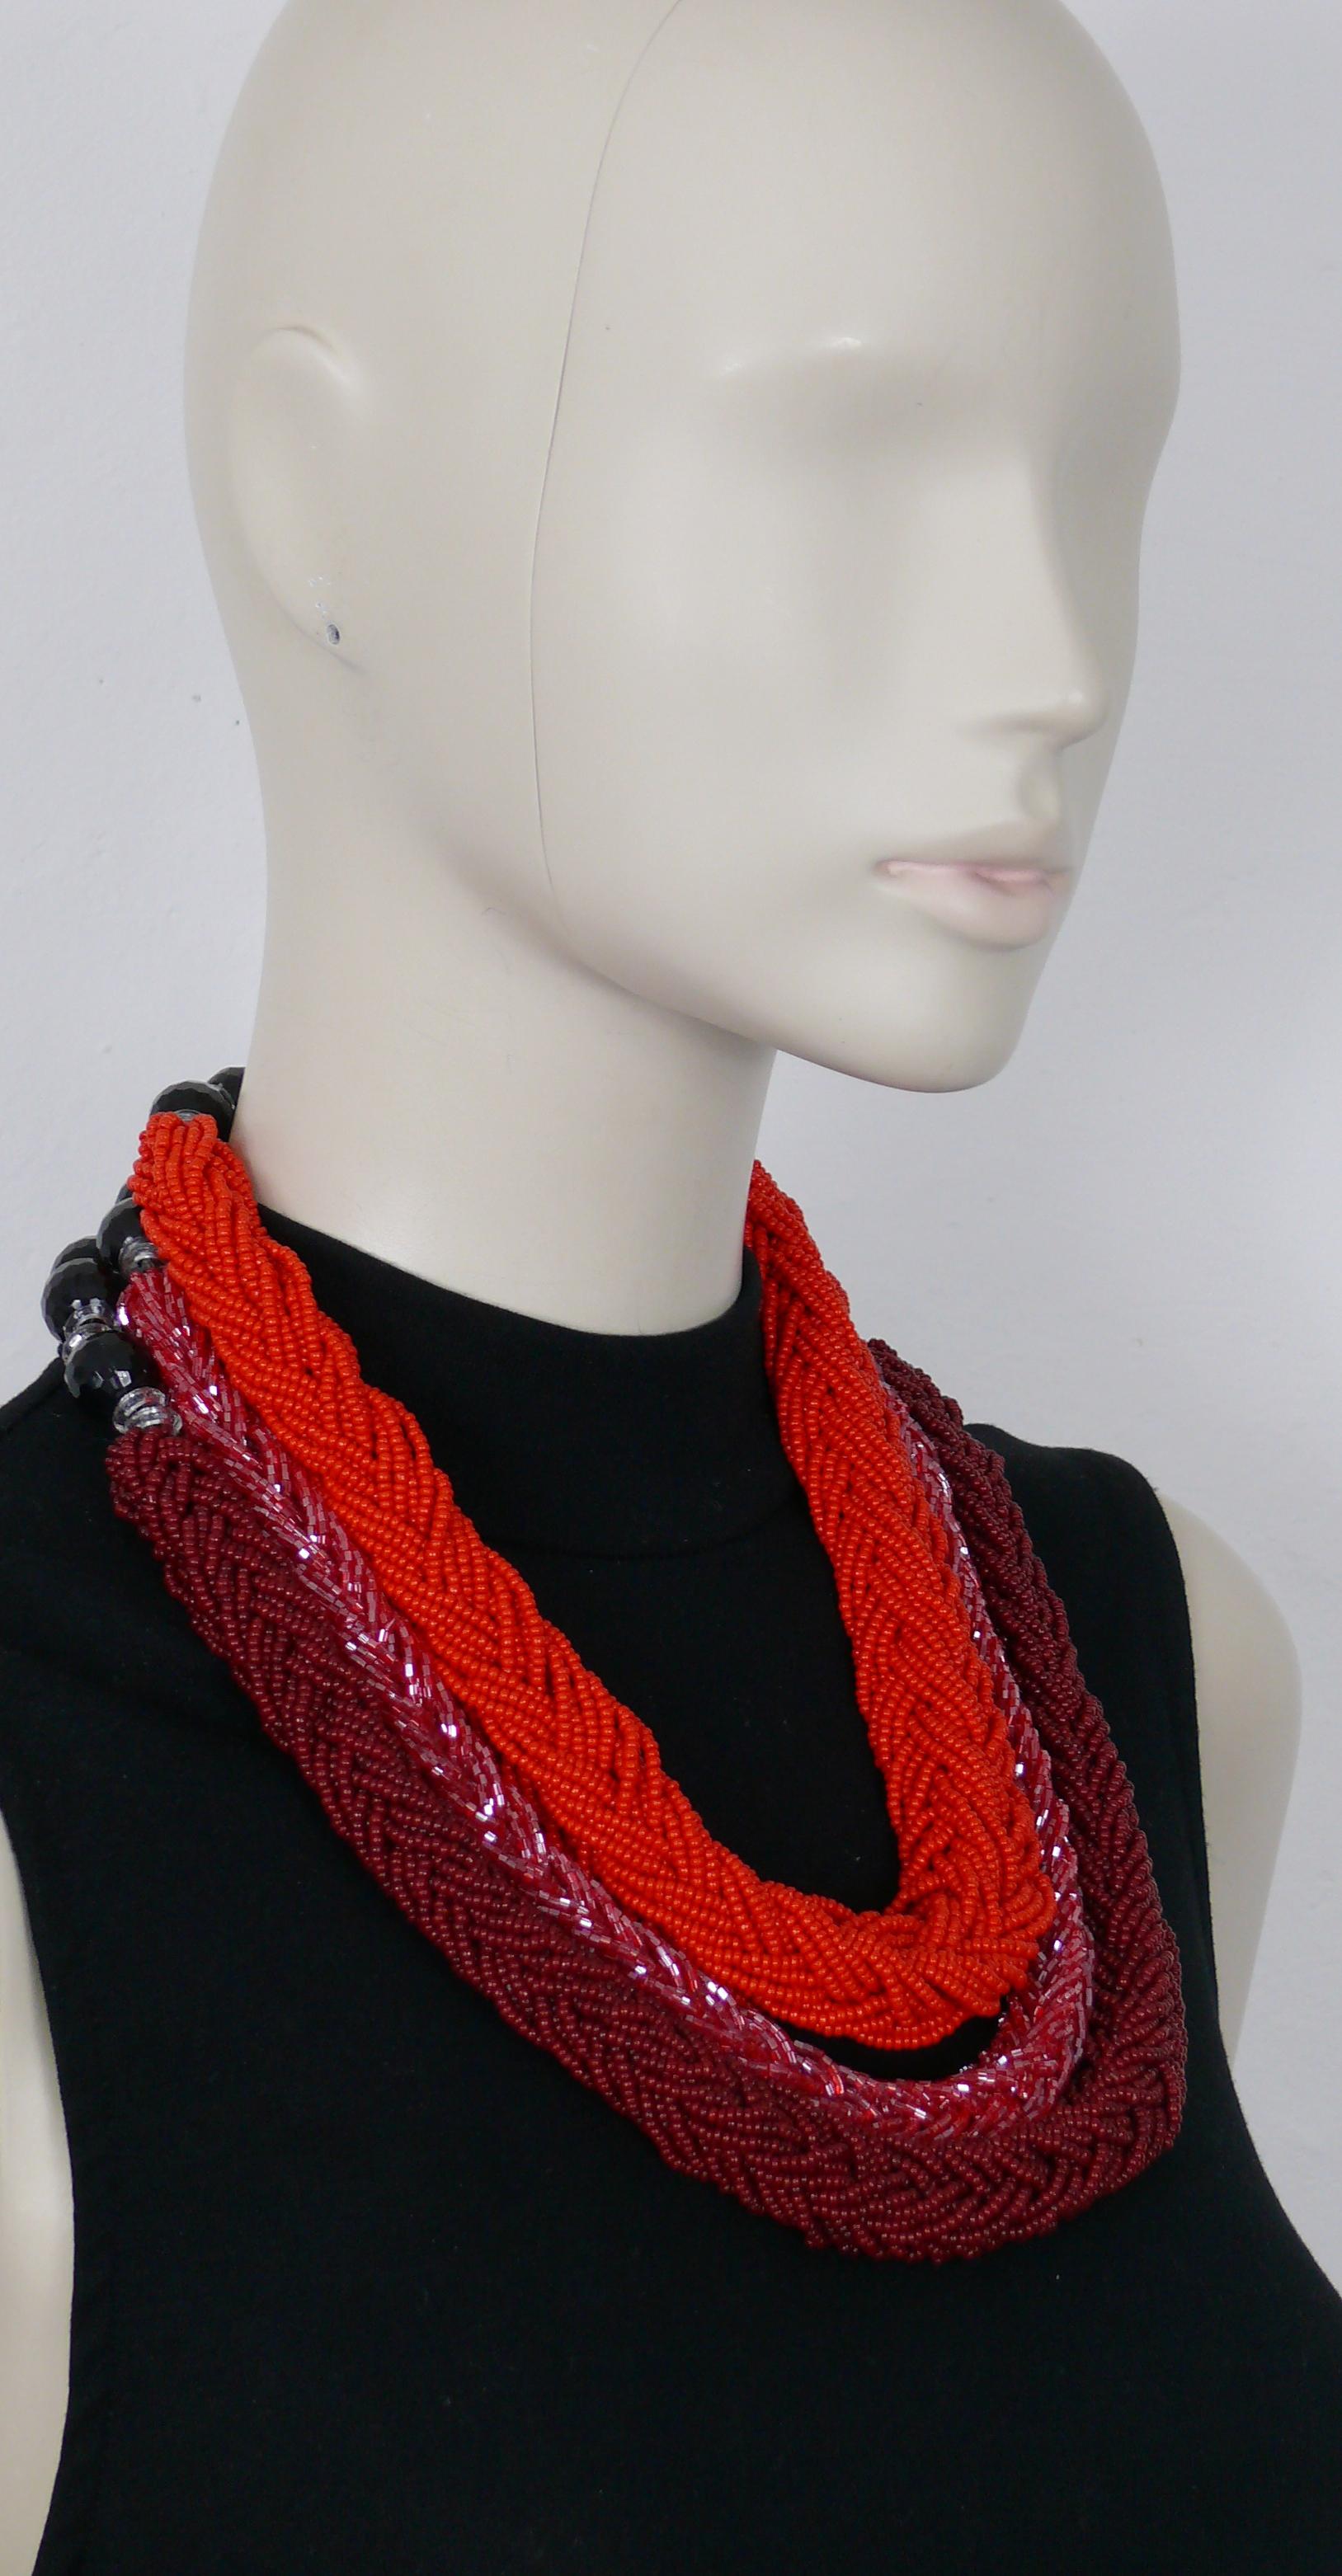 Giorgio Armani Statement Three Stand Braided Necklace In Excellent Condition For Sale In Nice, FR